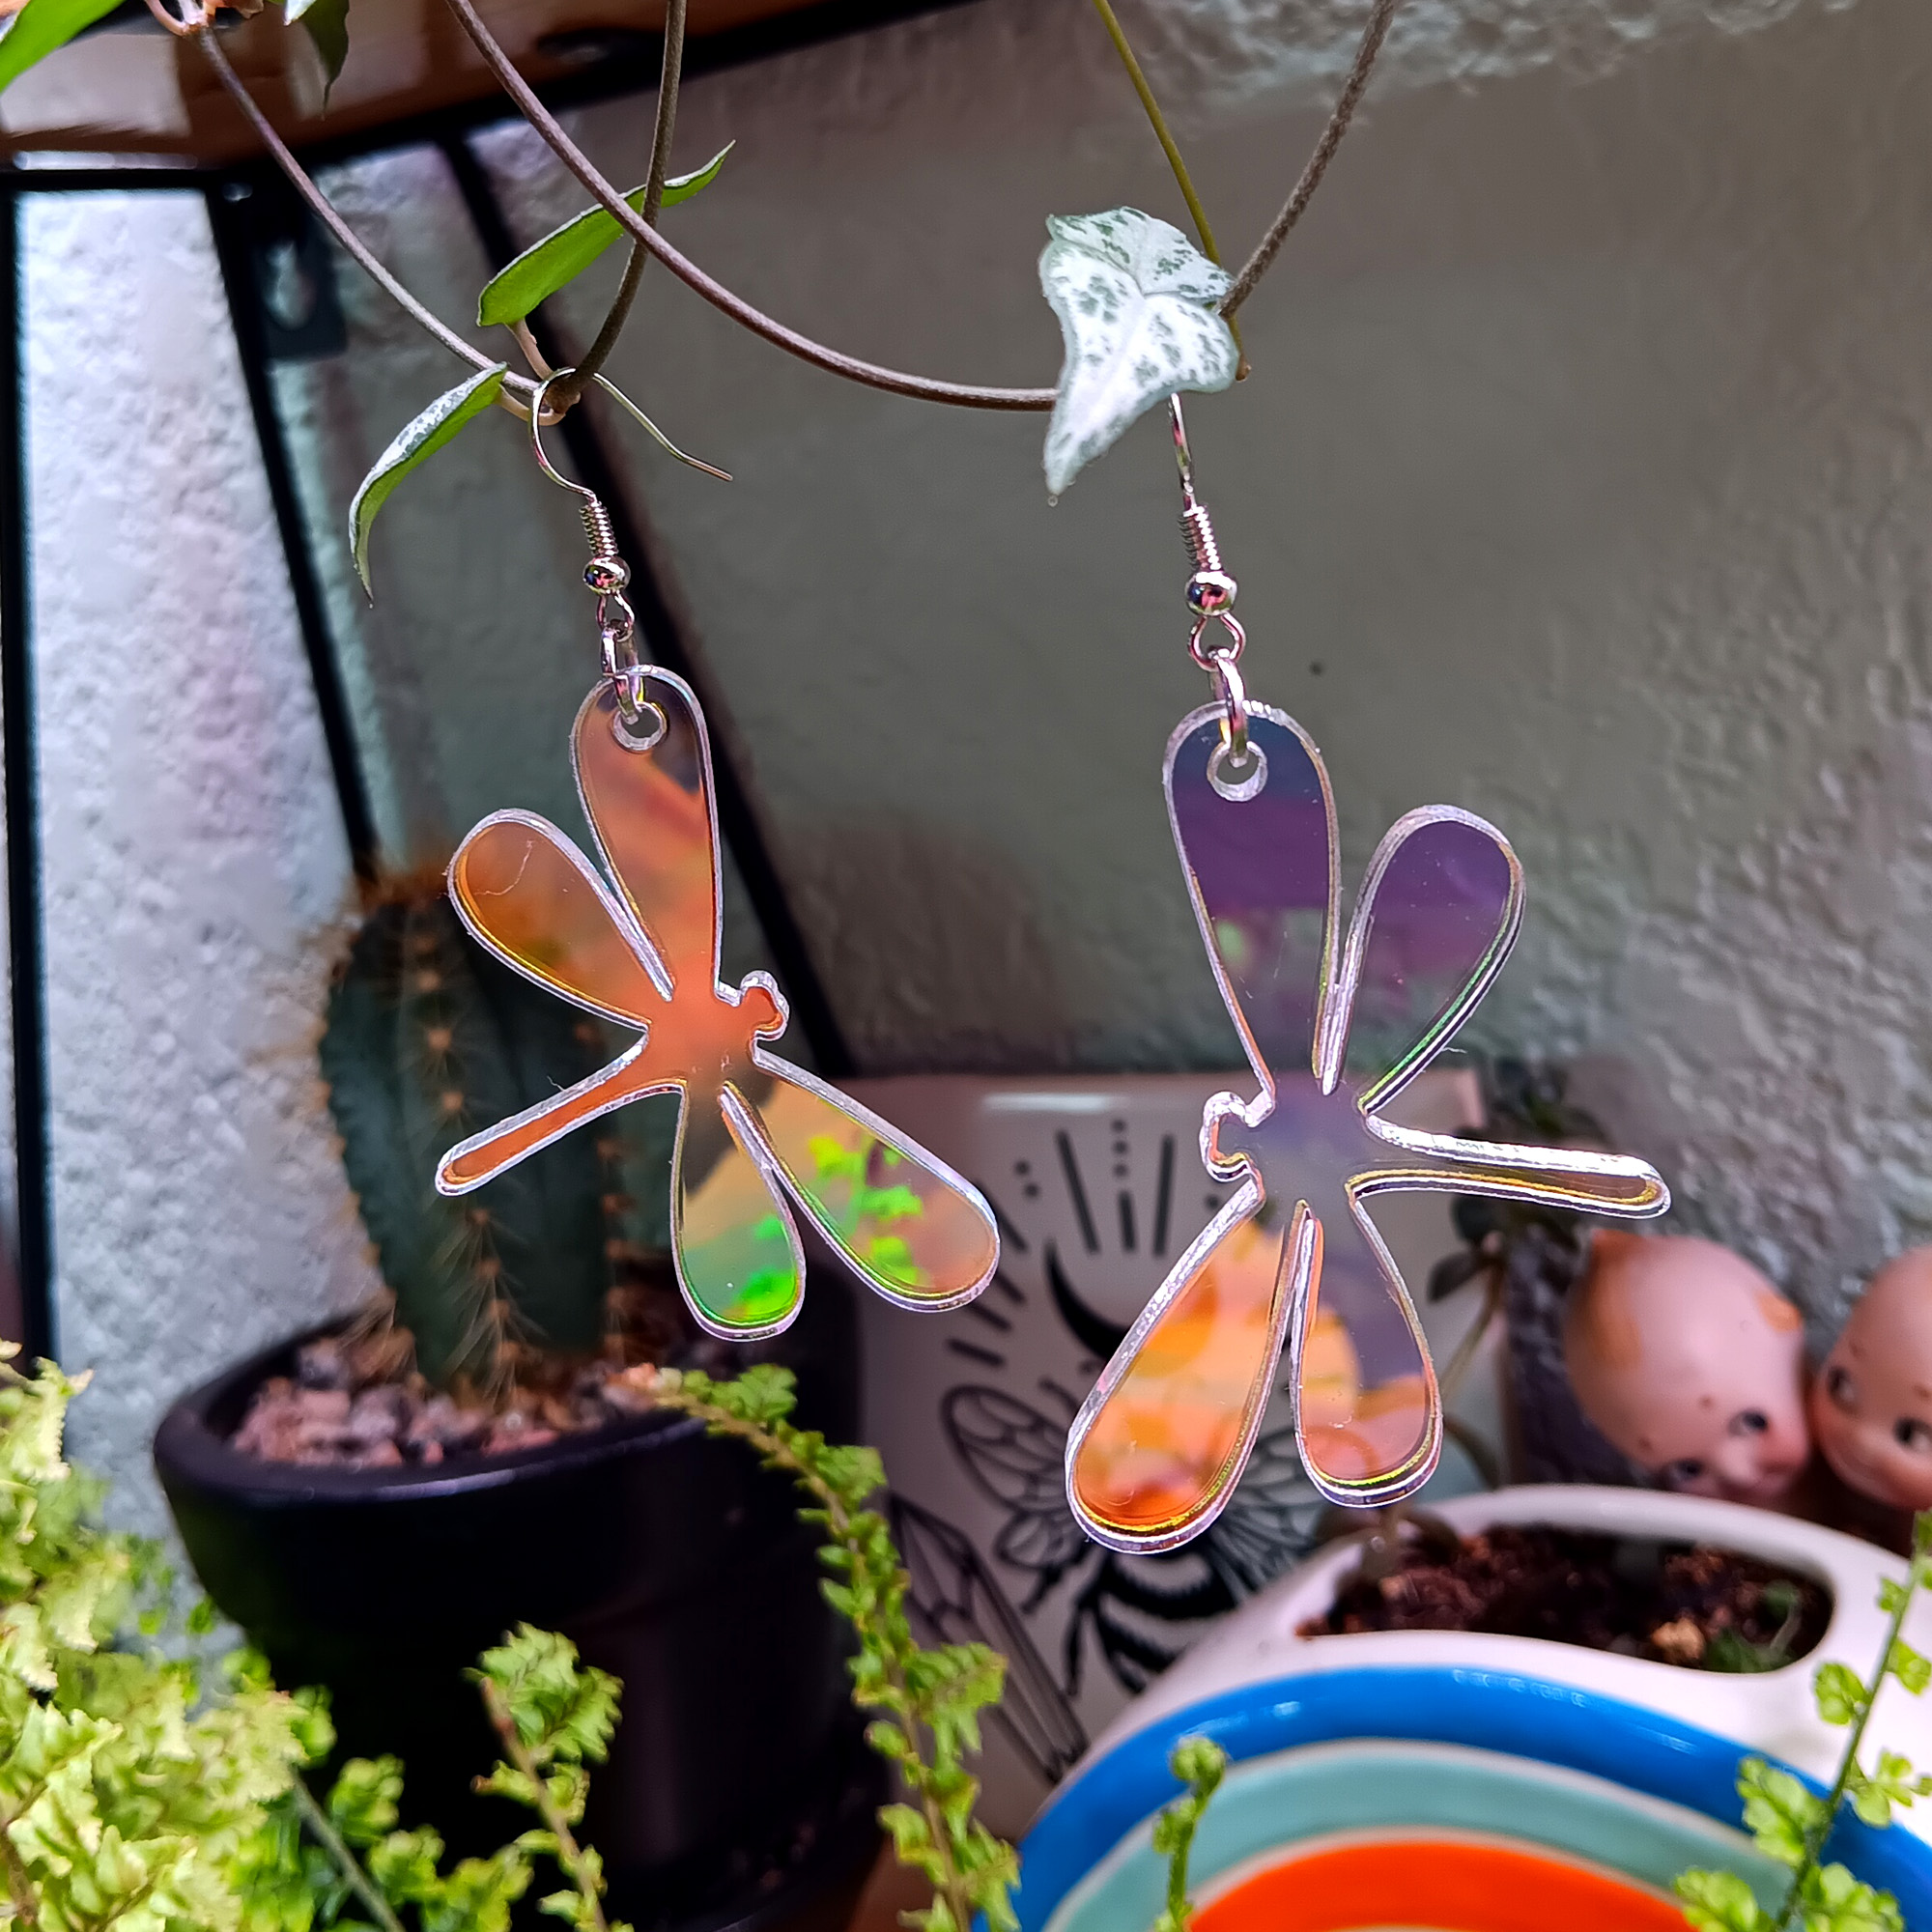 Iridescent Summertime Big Huge Dragonfly Dragonflies Shape Pretty Dangle Statement Earrings Shiny Jewelry ()